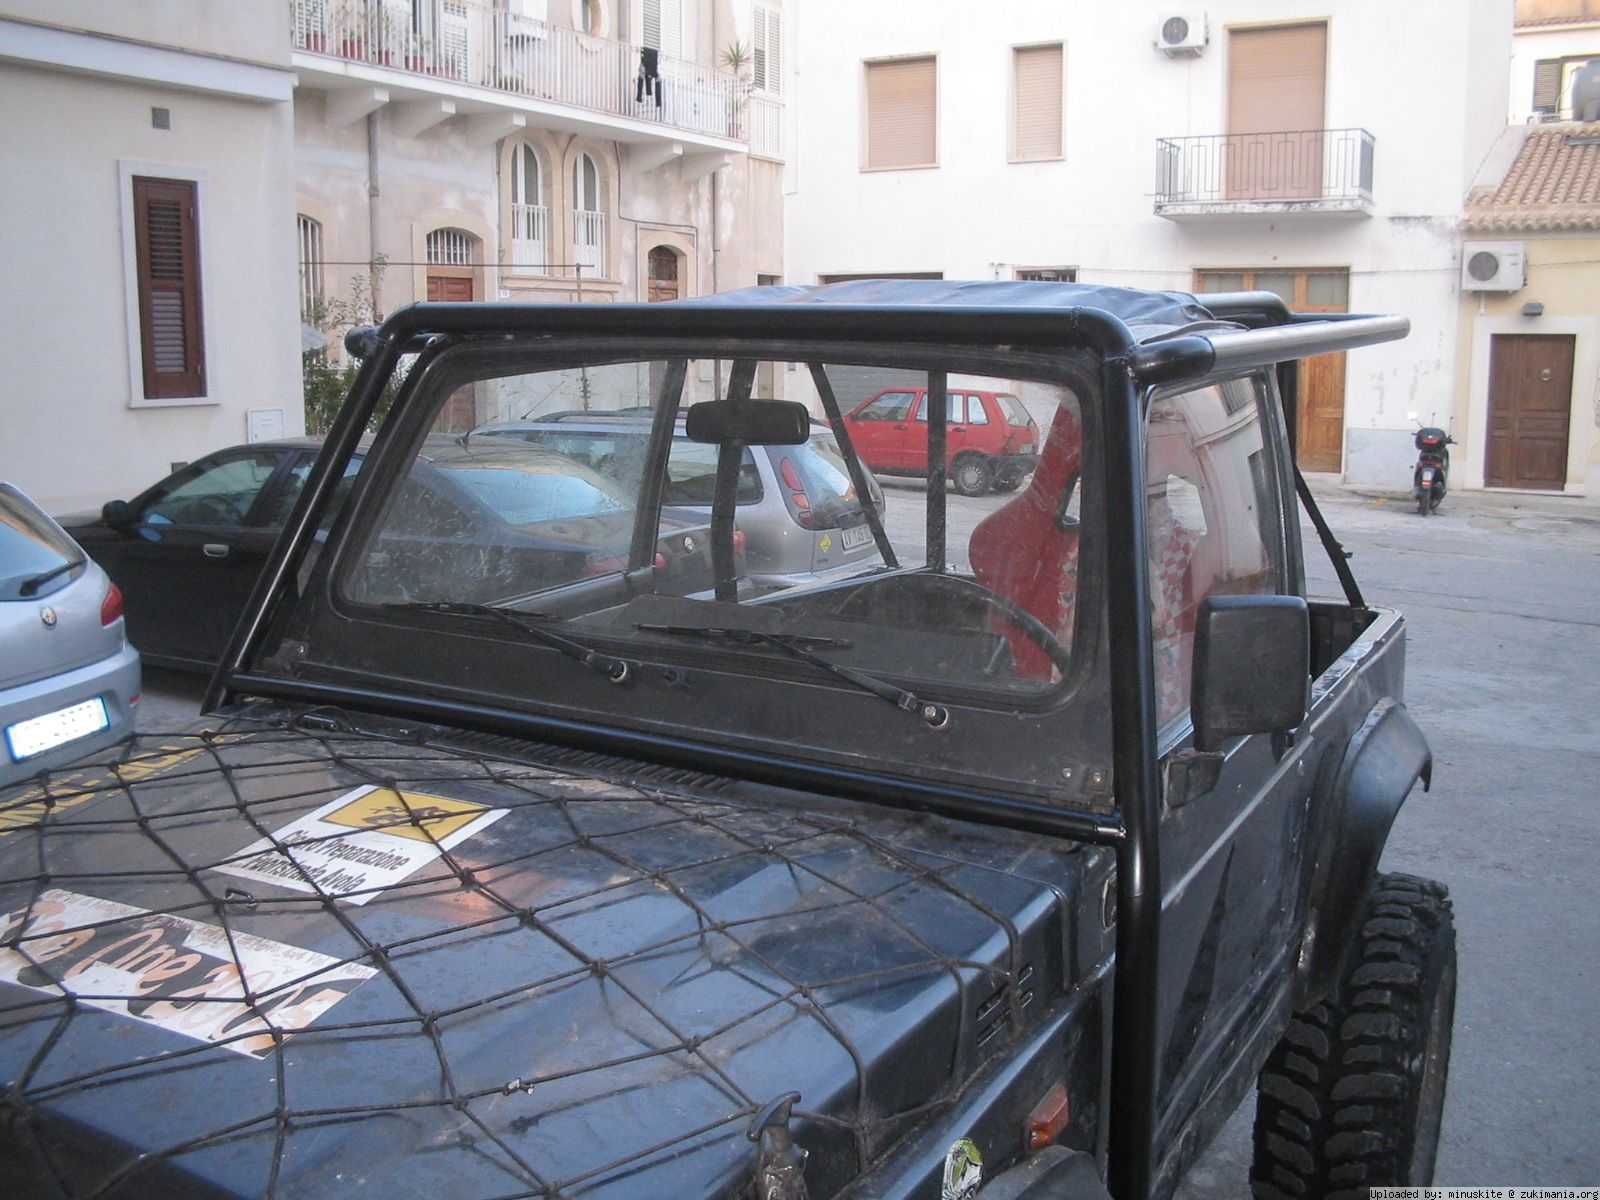 nuovo roll cage